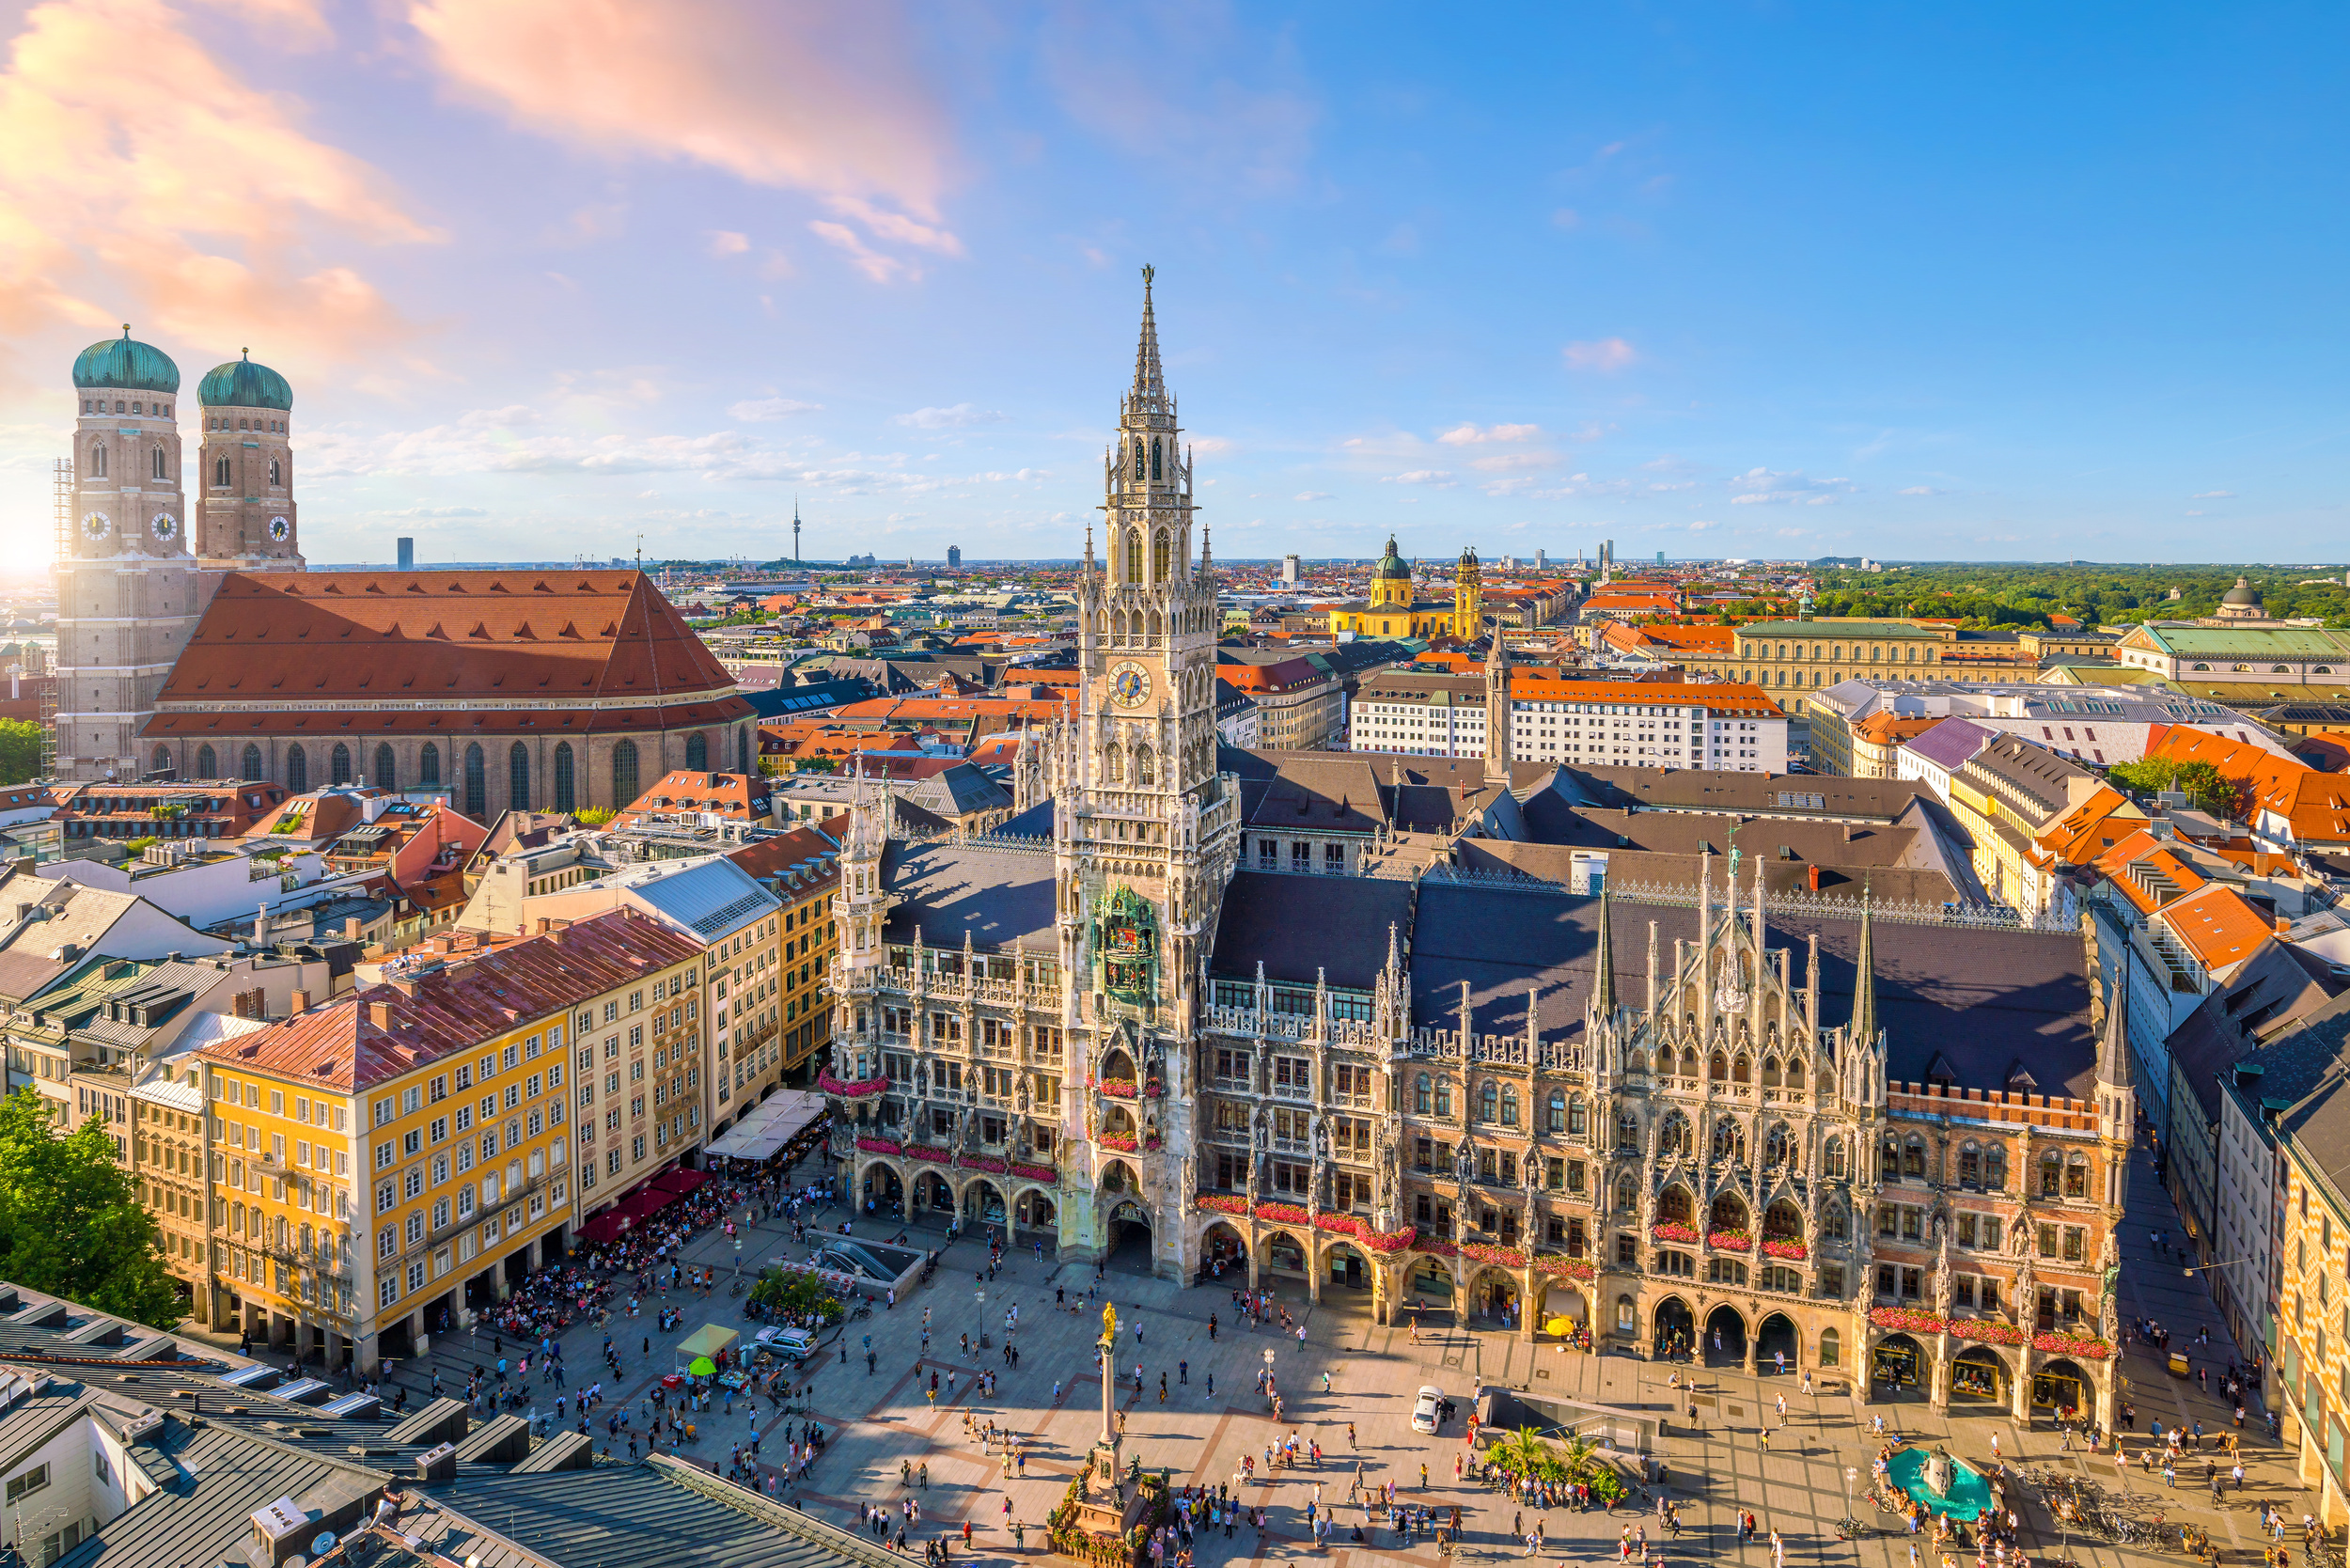 <p>Germany might not be known for amazing cheese, but you’ll find plenty of great options in Munich. The Bavarian capital is full of artisan cheese shops and fondue restaurants for the dairy enthusiast in your life.</p><p>You may also like: <a href='https://www.yardbarker.com/lifestyle/articles/the_20_best_small_towns_in_europe_012224/s1__38397859'>The 20 best small towns in Europe</a></p>